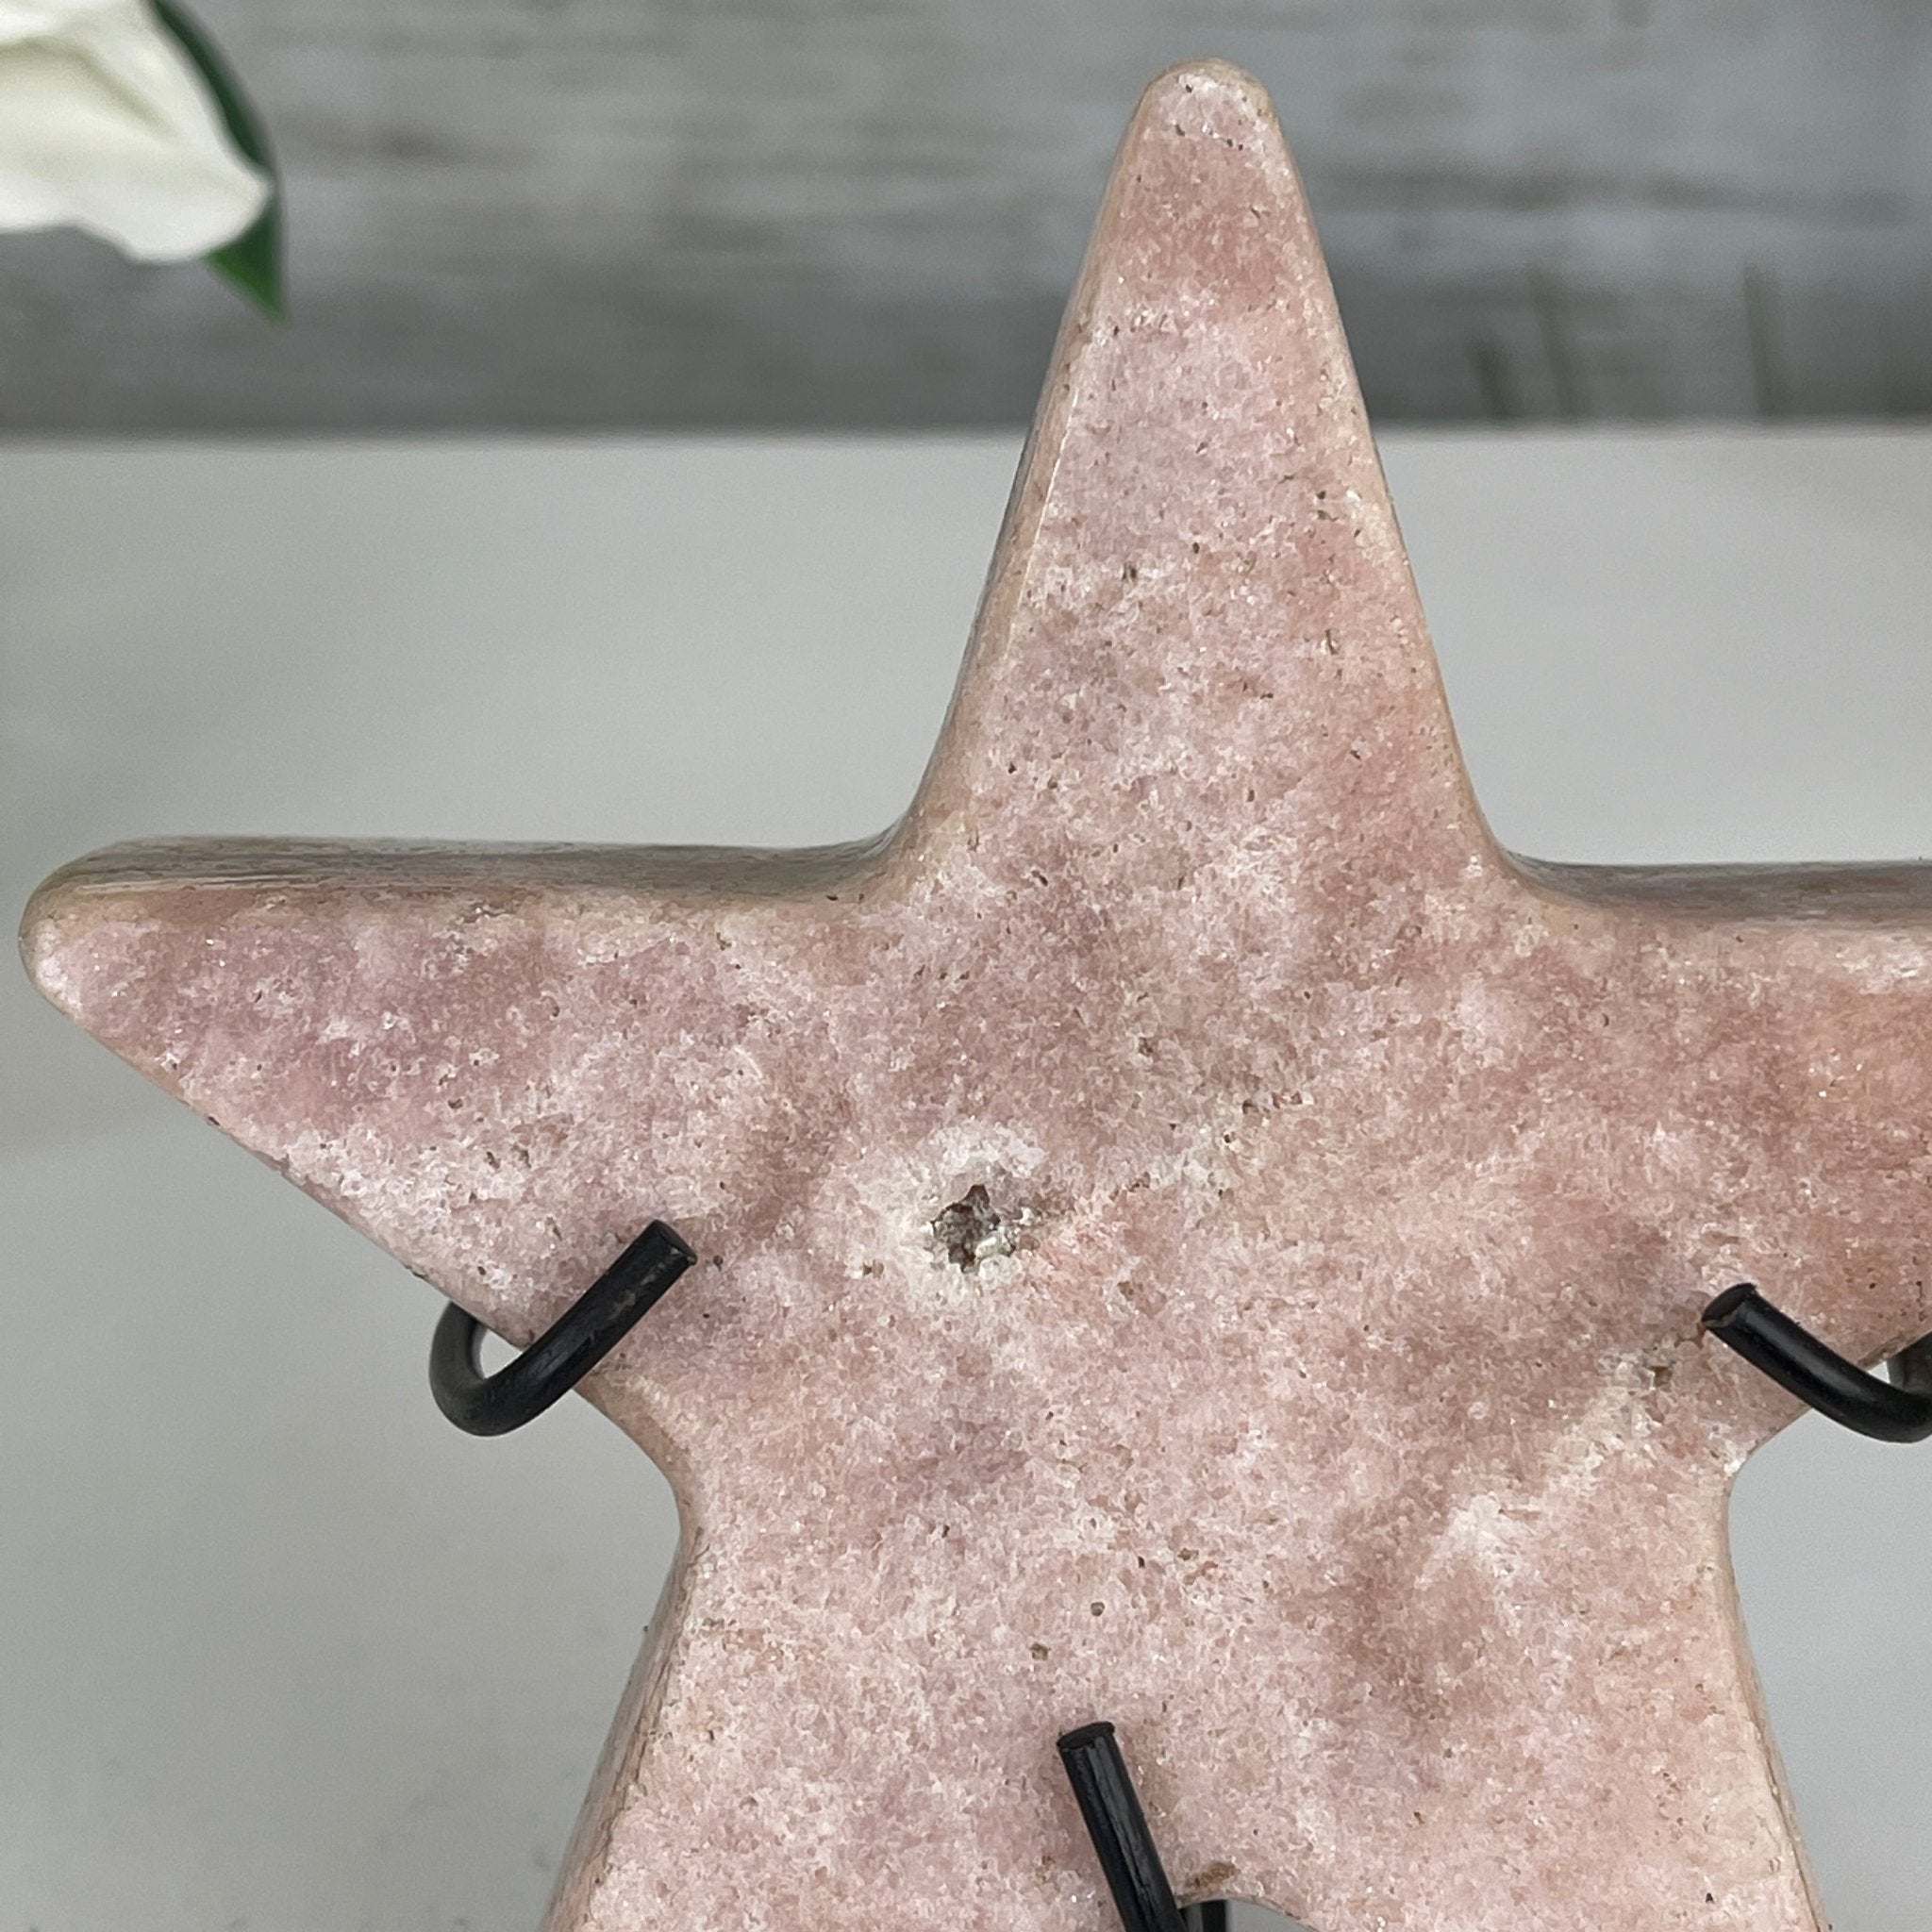 Pink Amethyst Star on a Metal Stand 5.5" Tall #5746-0003 by Brazil Gems - Brazil GemsBrazil GemsPink Amethyst Star on a Metal Stand 5.5" Tall #5746-0003 by Brazil GemsStars5746-0003